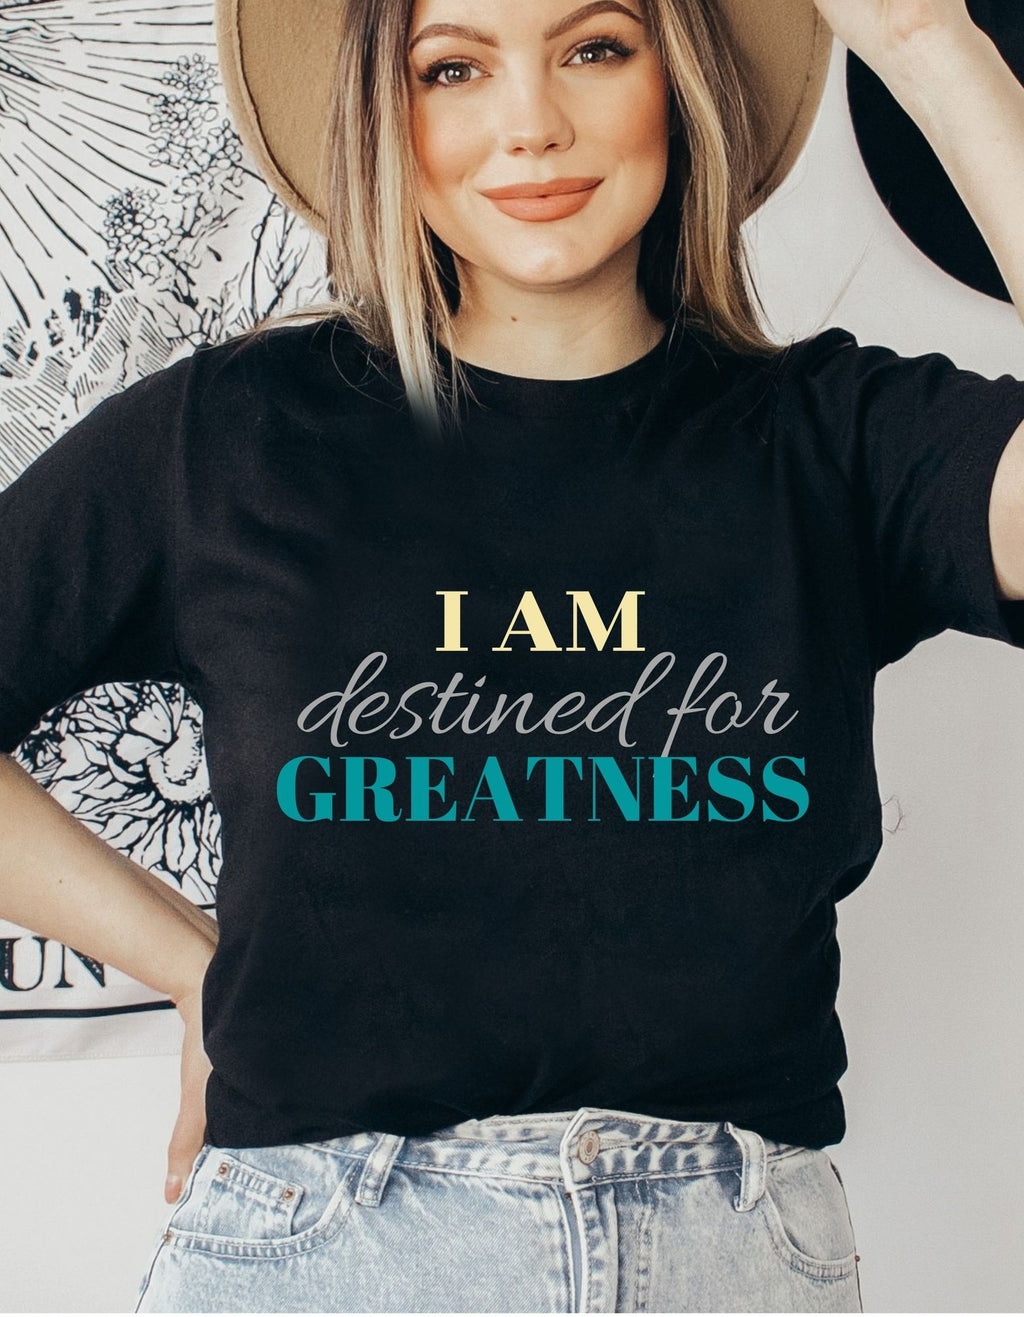 I AM Series Destined for Greatness.